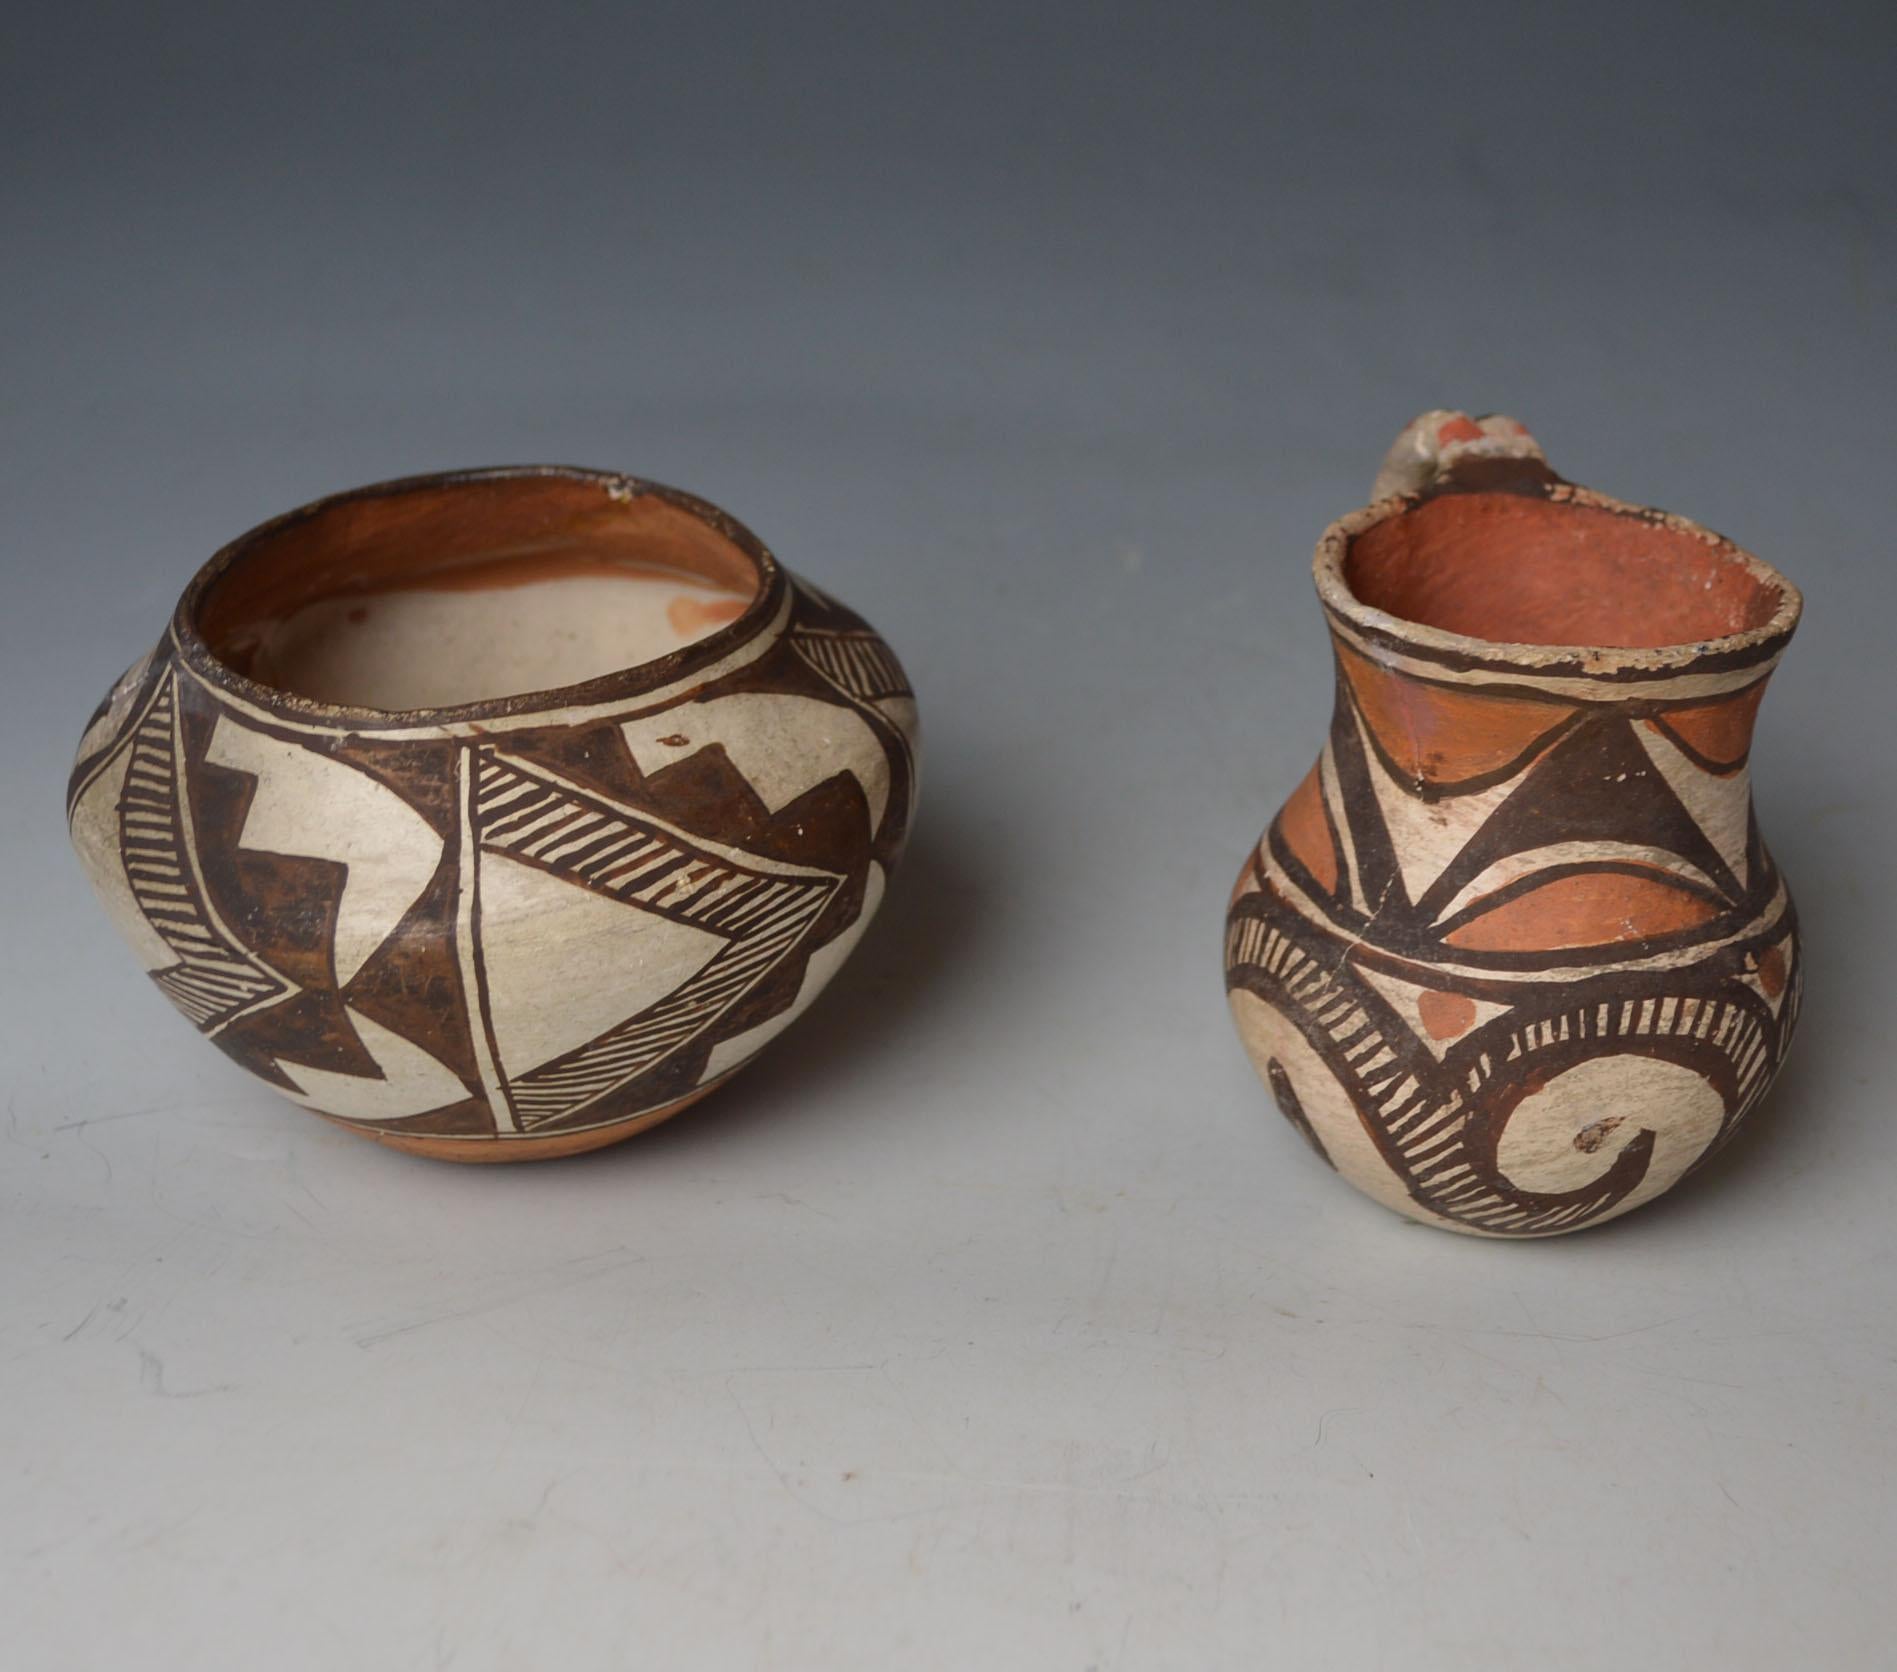 2 Old pueblo pottery items: Acoma bowl and a jug or possibly Casas Grandes, the bowl has a old inscription on bottom Rosa t pueblo.... .. cant quite make it out
Size Bowl 5 x 4 inches 13 x 10 cm Jug 4 x 4 inches 10 x 10 cm
Condition: Acoma bowl